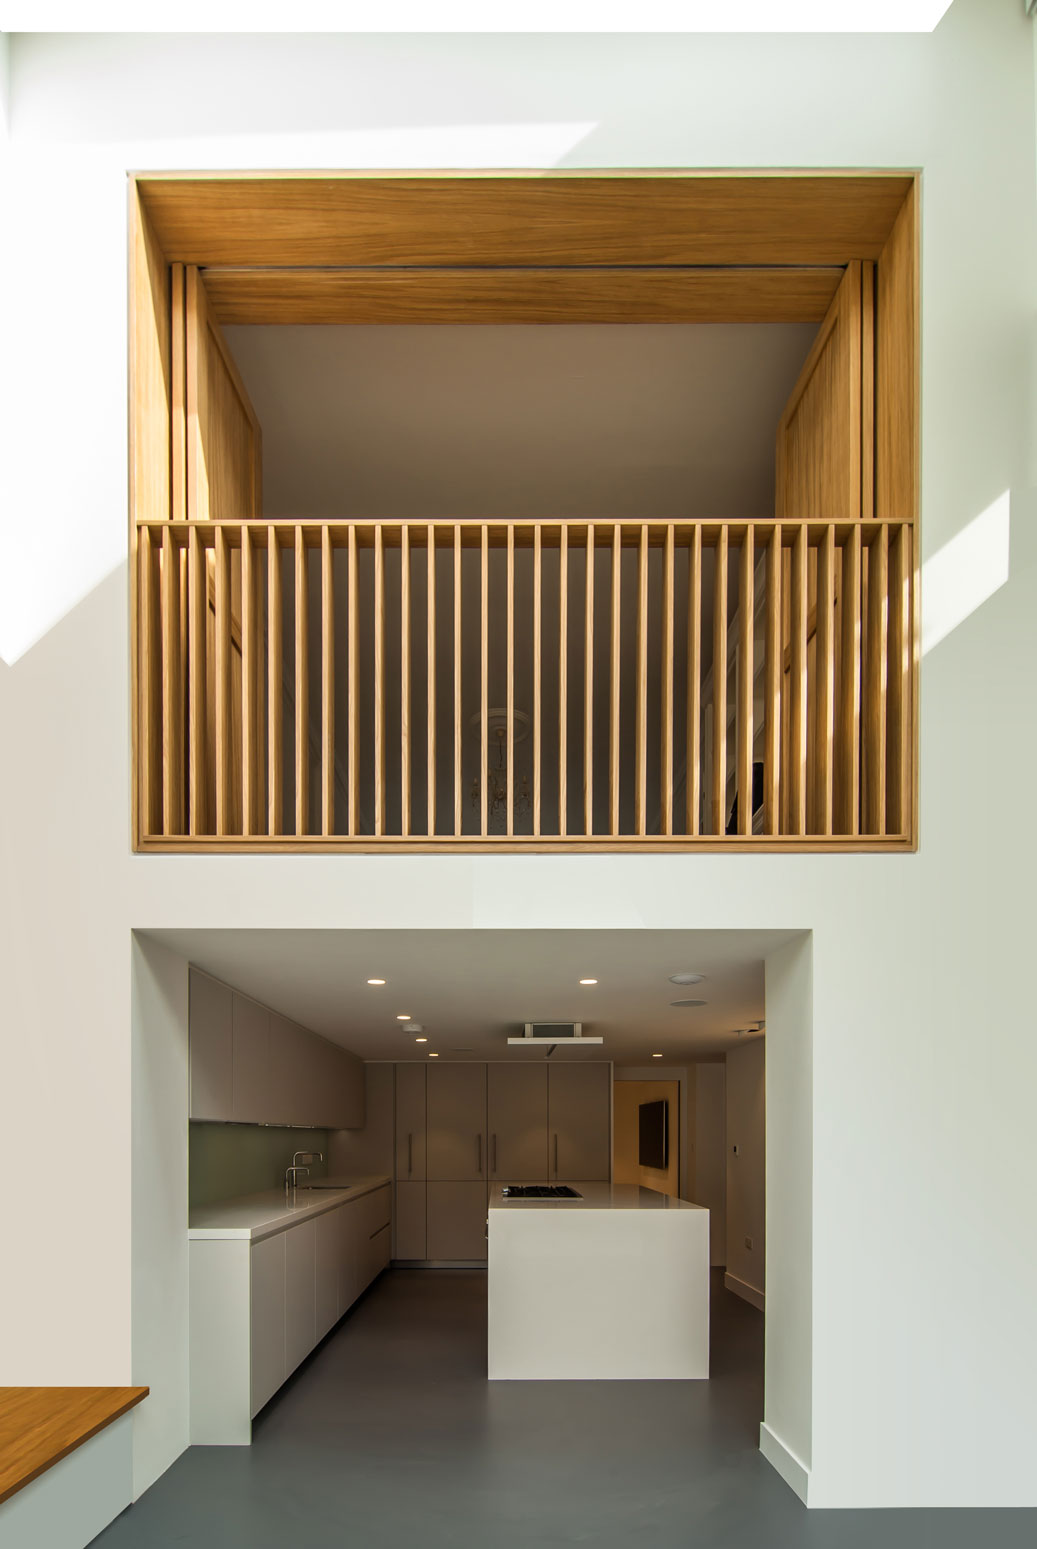 Internal balcony consisting of an Oak shutter frame balustrade being the focus amongst the white walls.